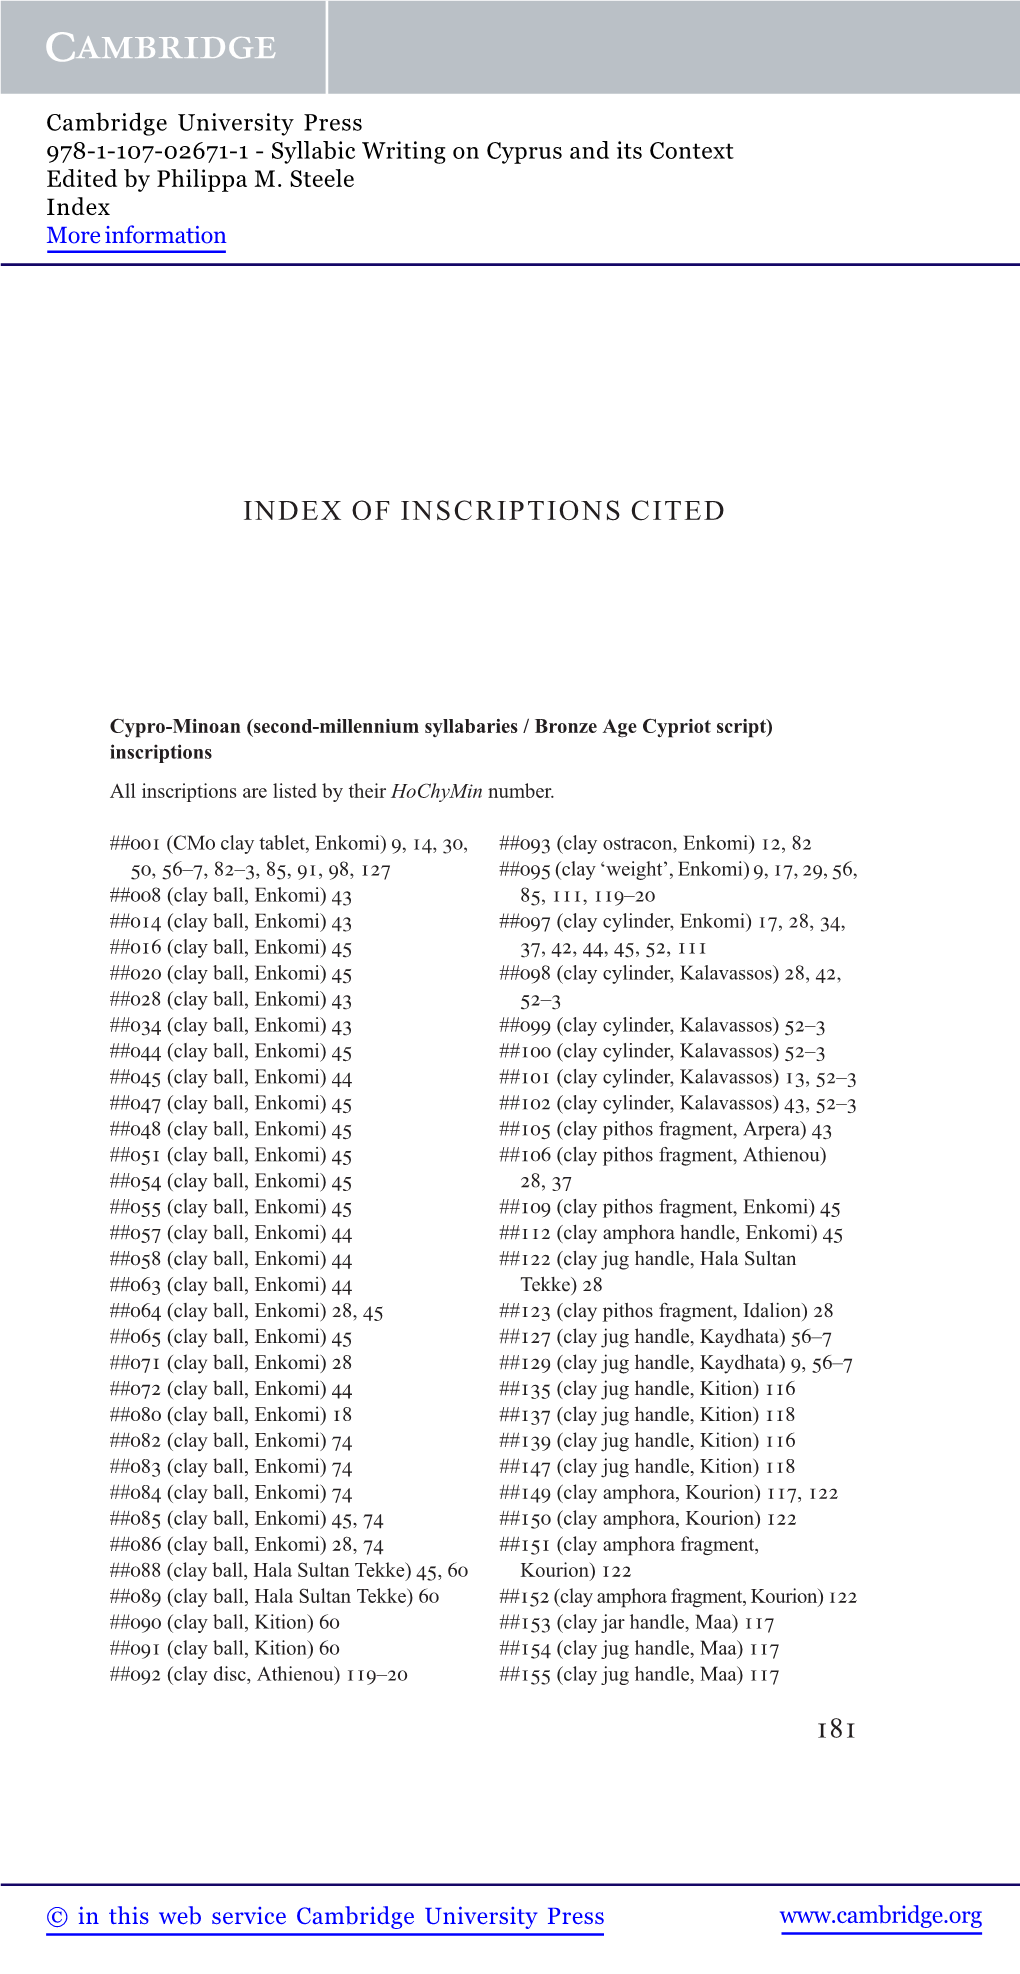 Index of Inscriptions Cited